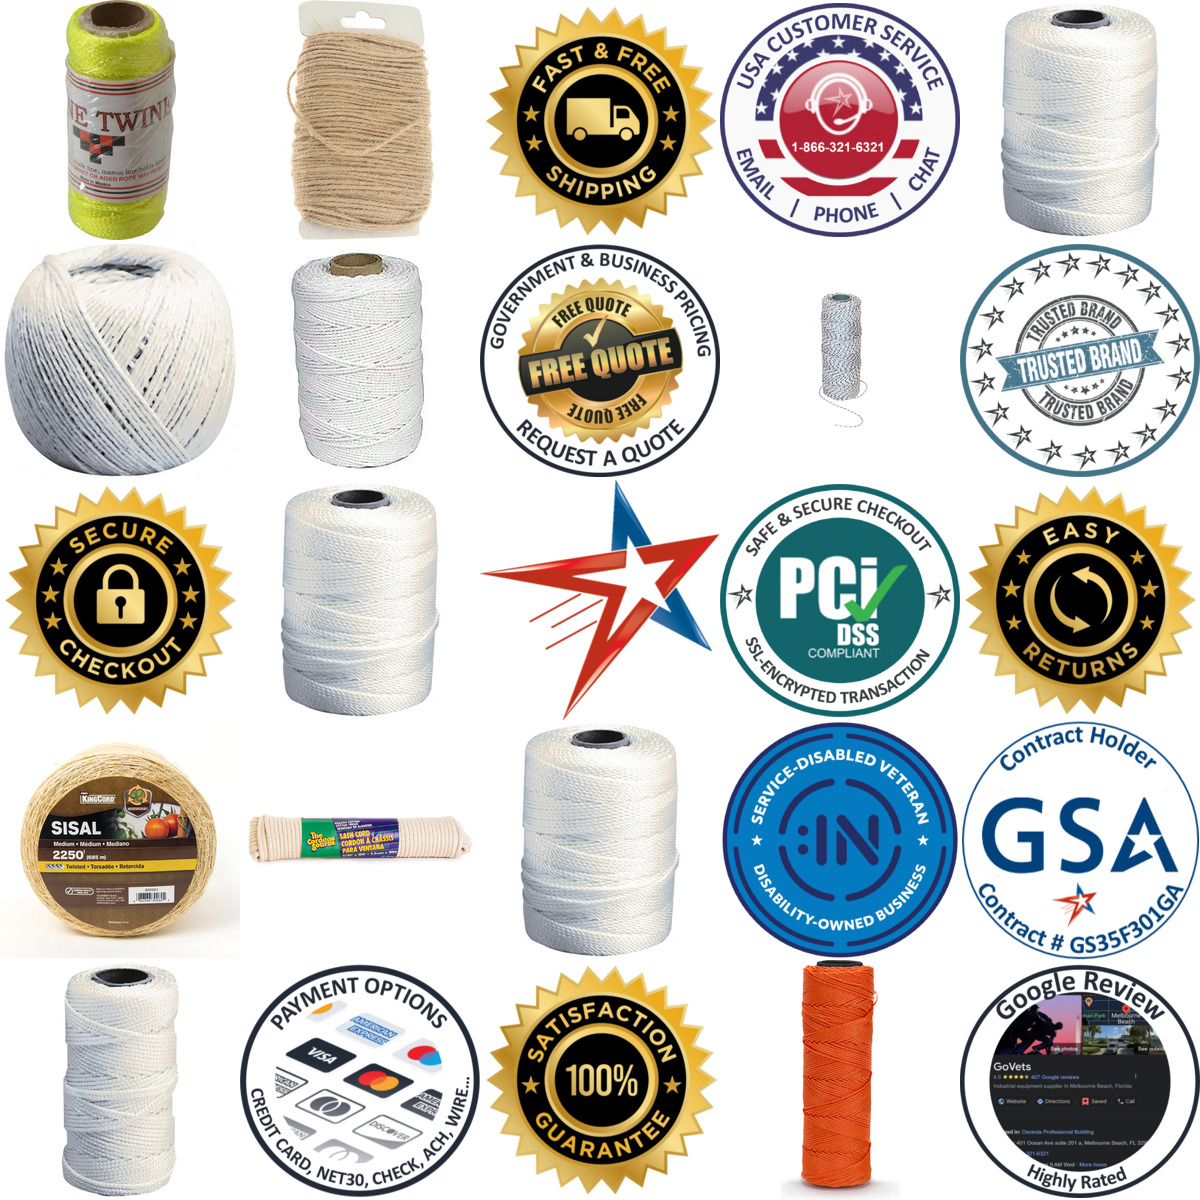 A selection of Twine products on GoVets